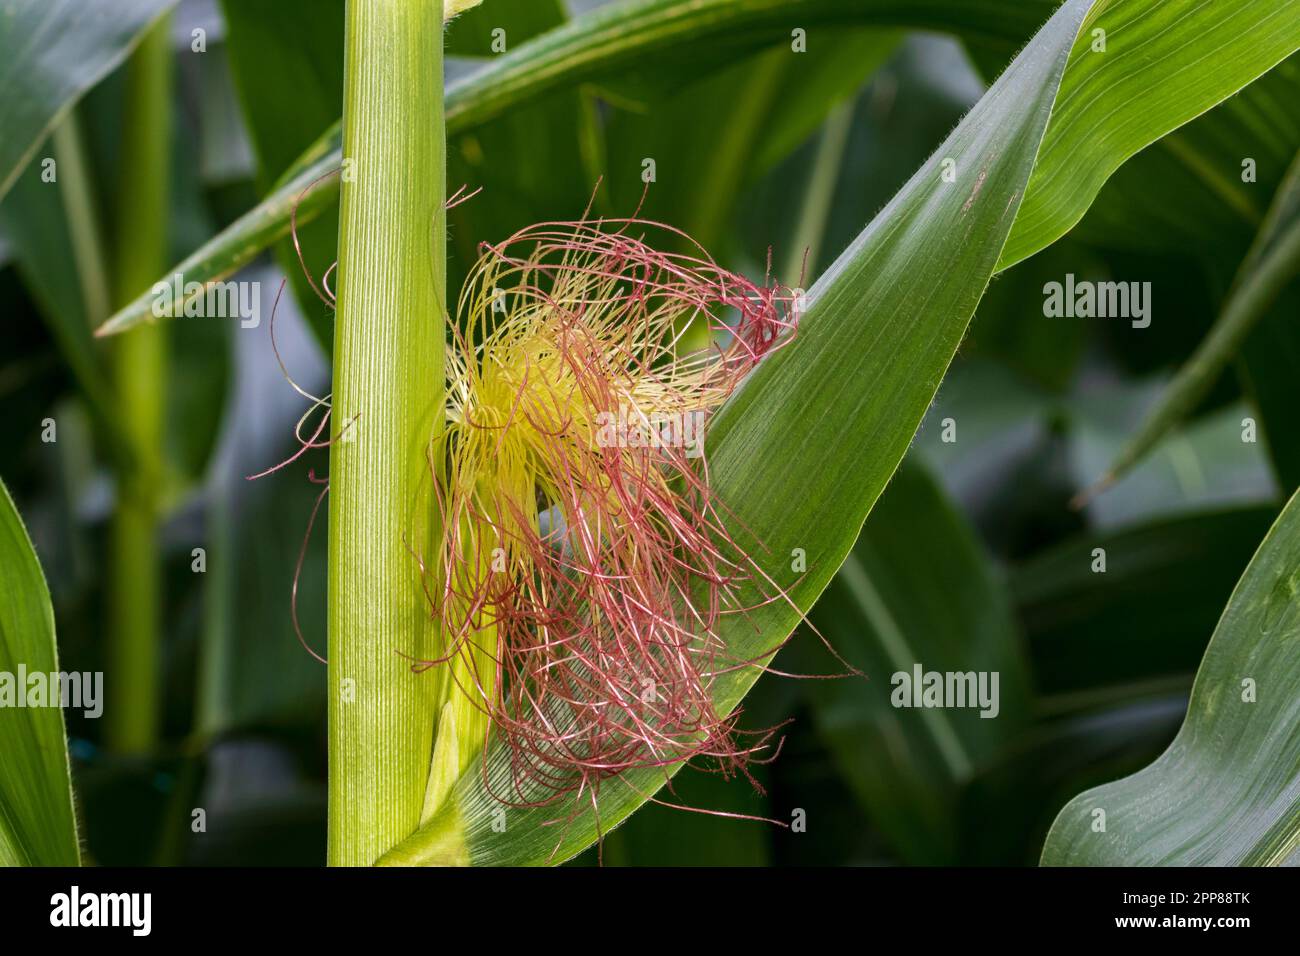 Cornfield with corn ear and silk growing on cornstalk. Ethanol, farming and agriculture concept Stock Photo